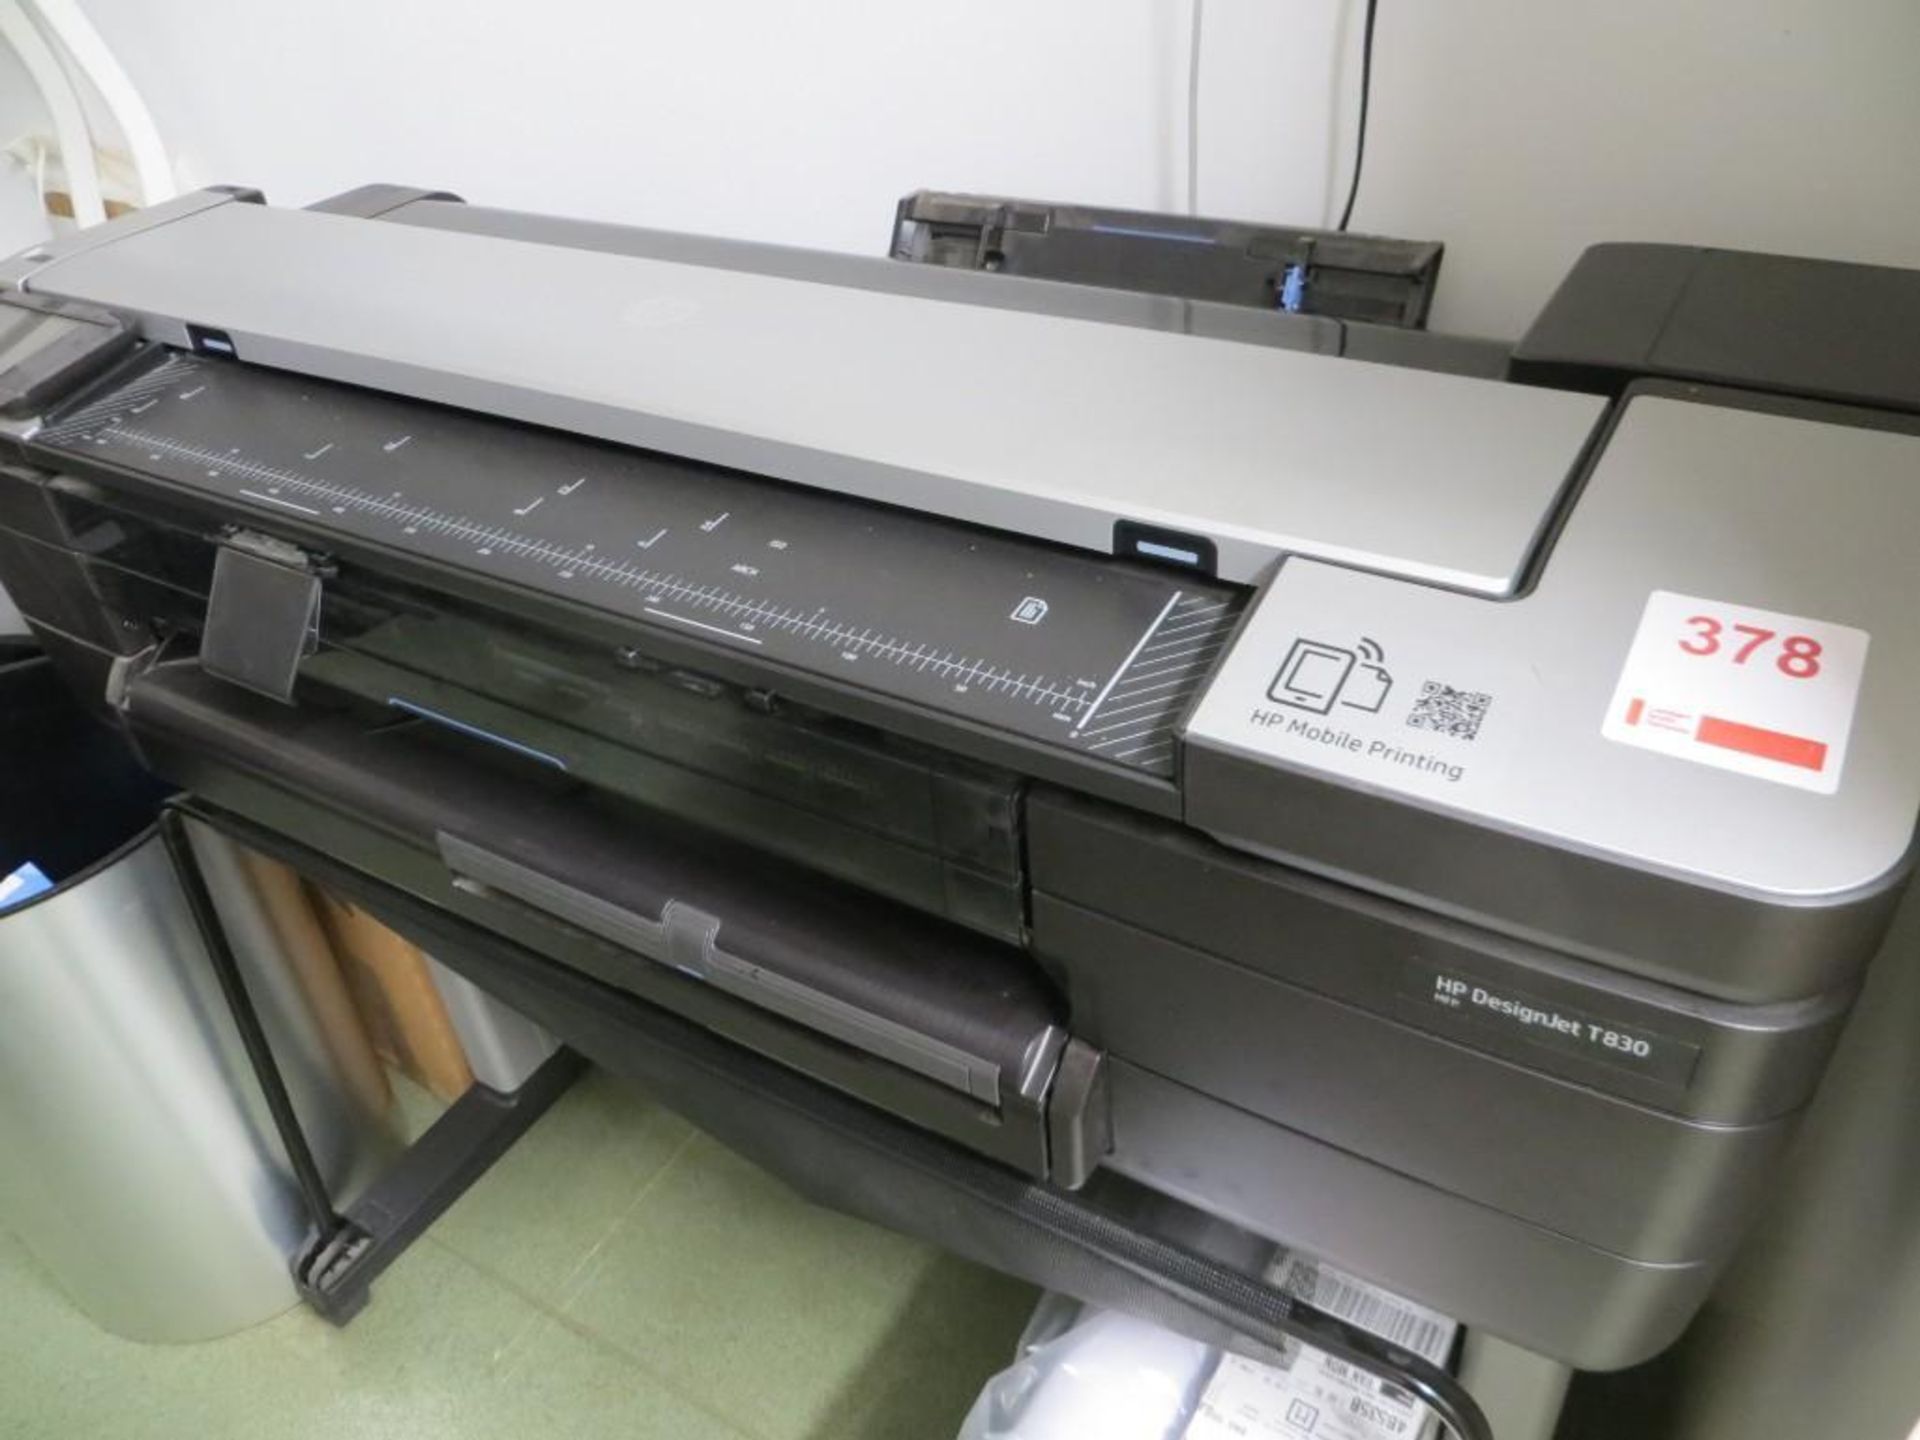 Hewlett Packard DesignJet T830 MFP A1 printer serial number CN7CN1M 60 5G c/w eight boxes of office - Image 2 of 3